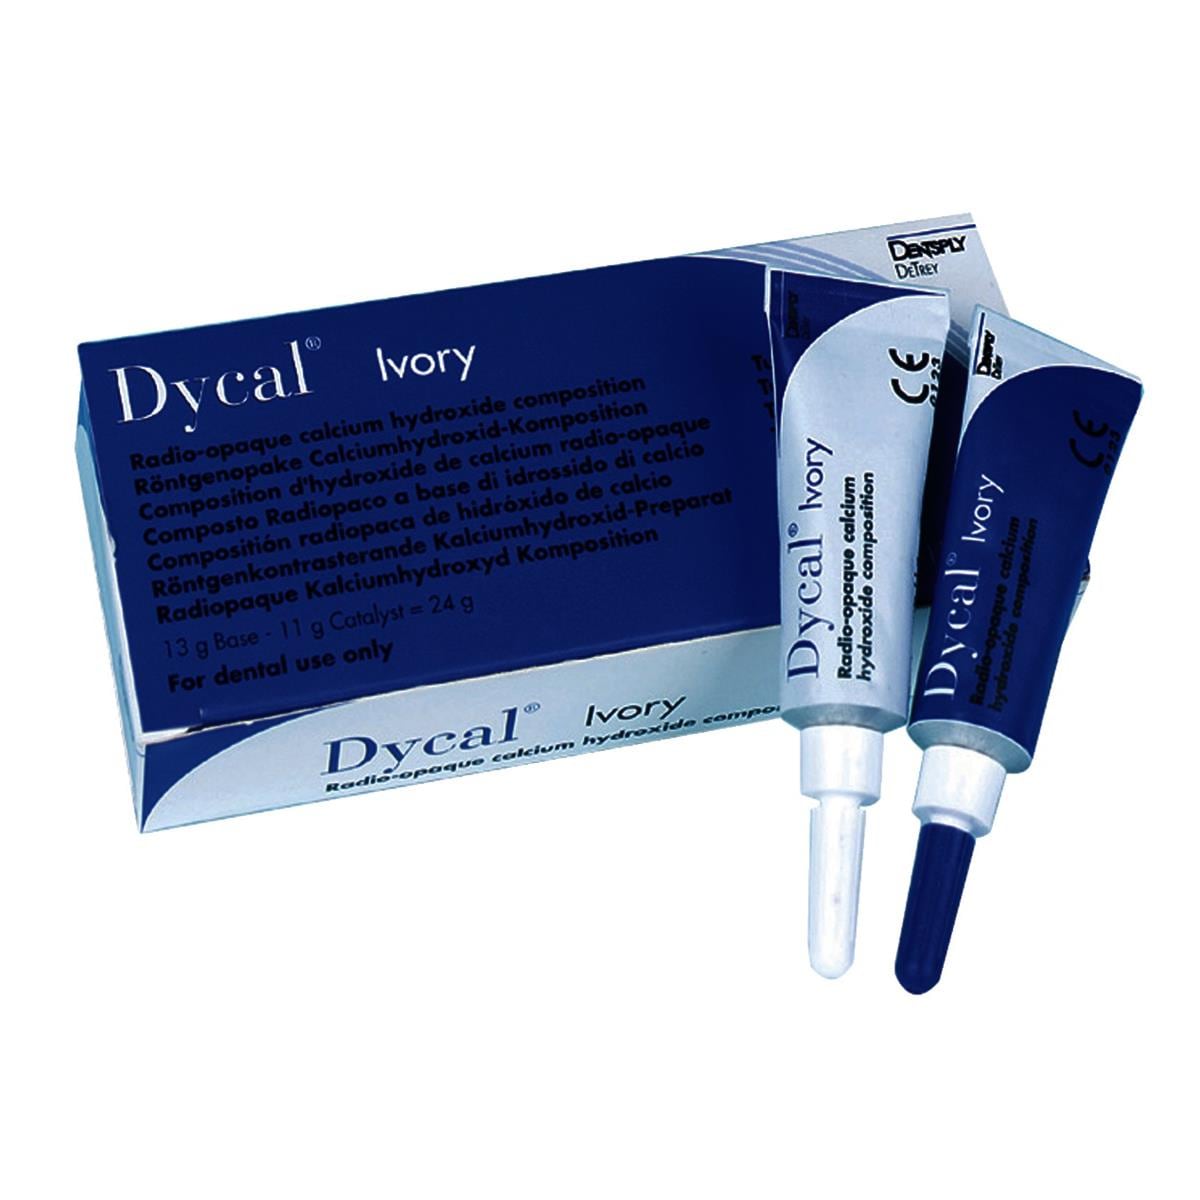 Dycal Ivory Refill Pack